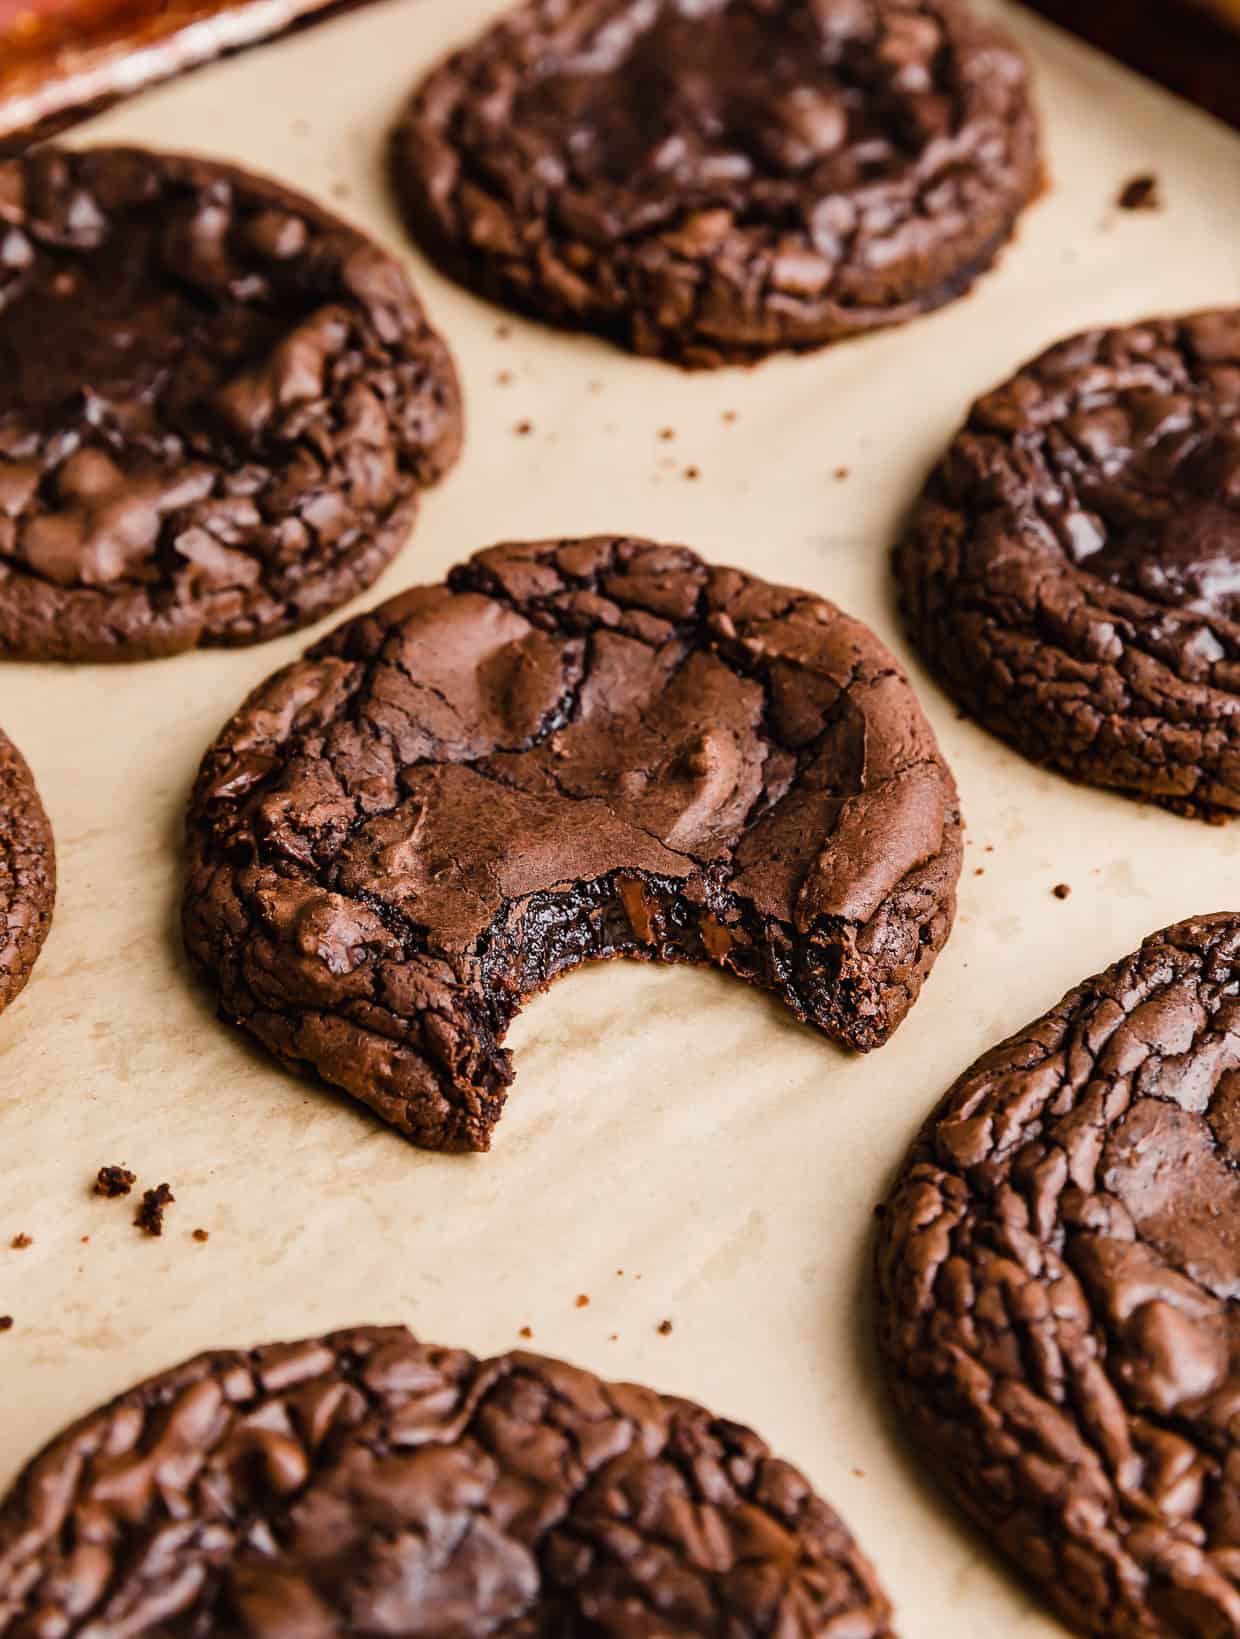 A brownie batter cookie on a tan parchment paper with a bite taken out of  the cookie.